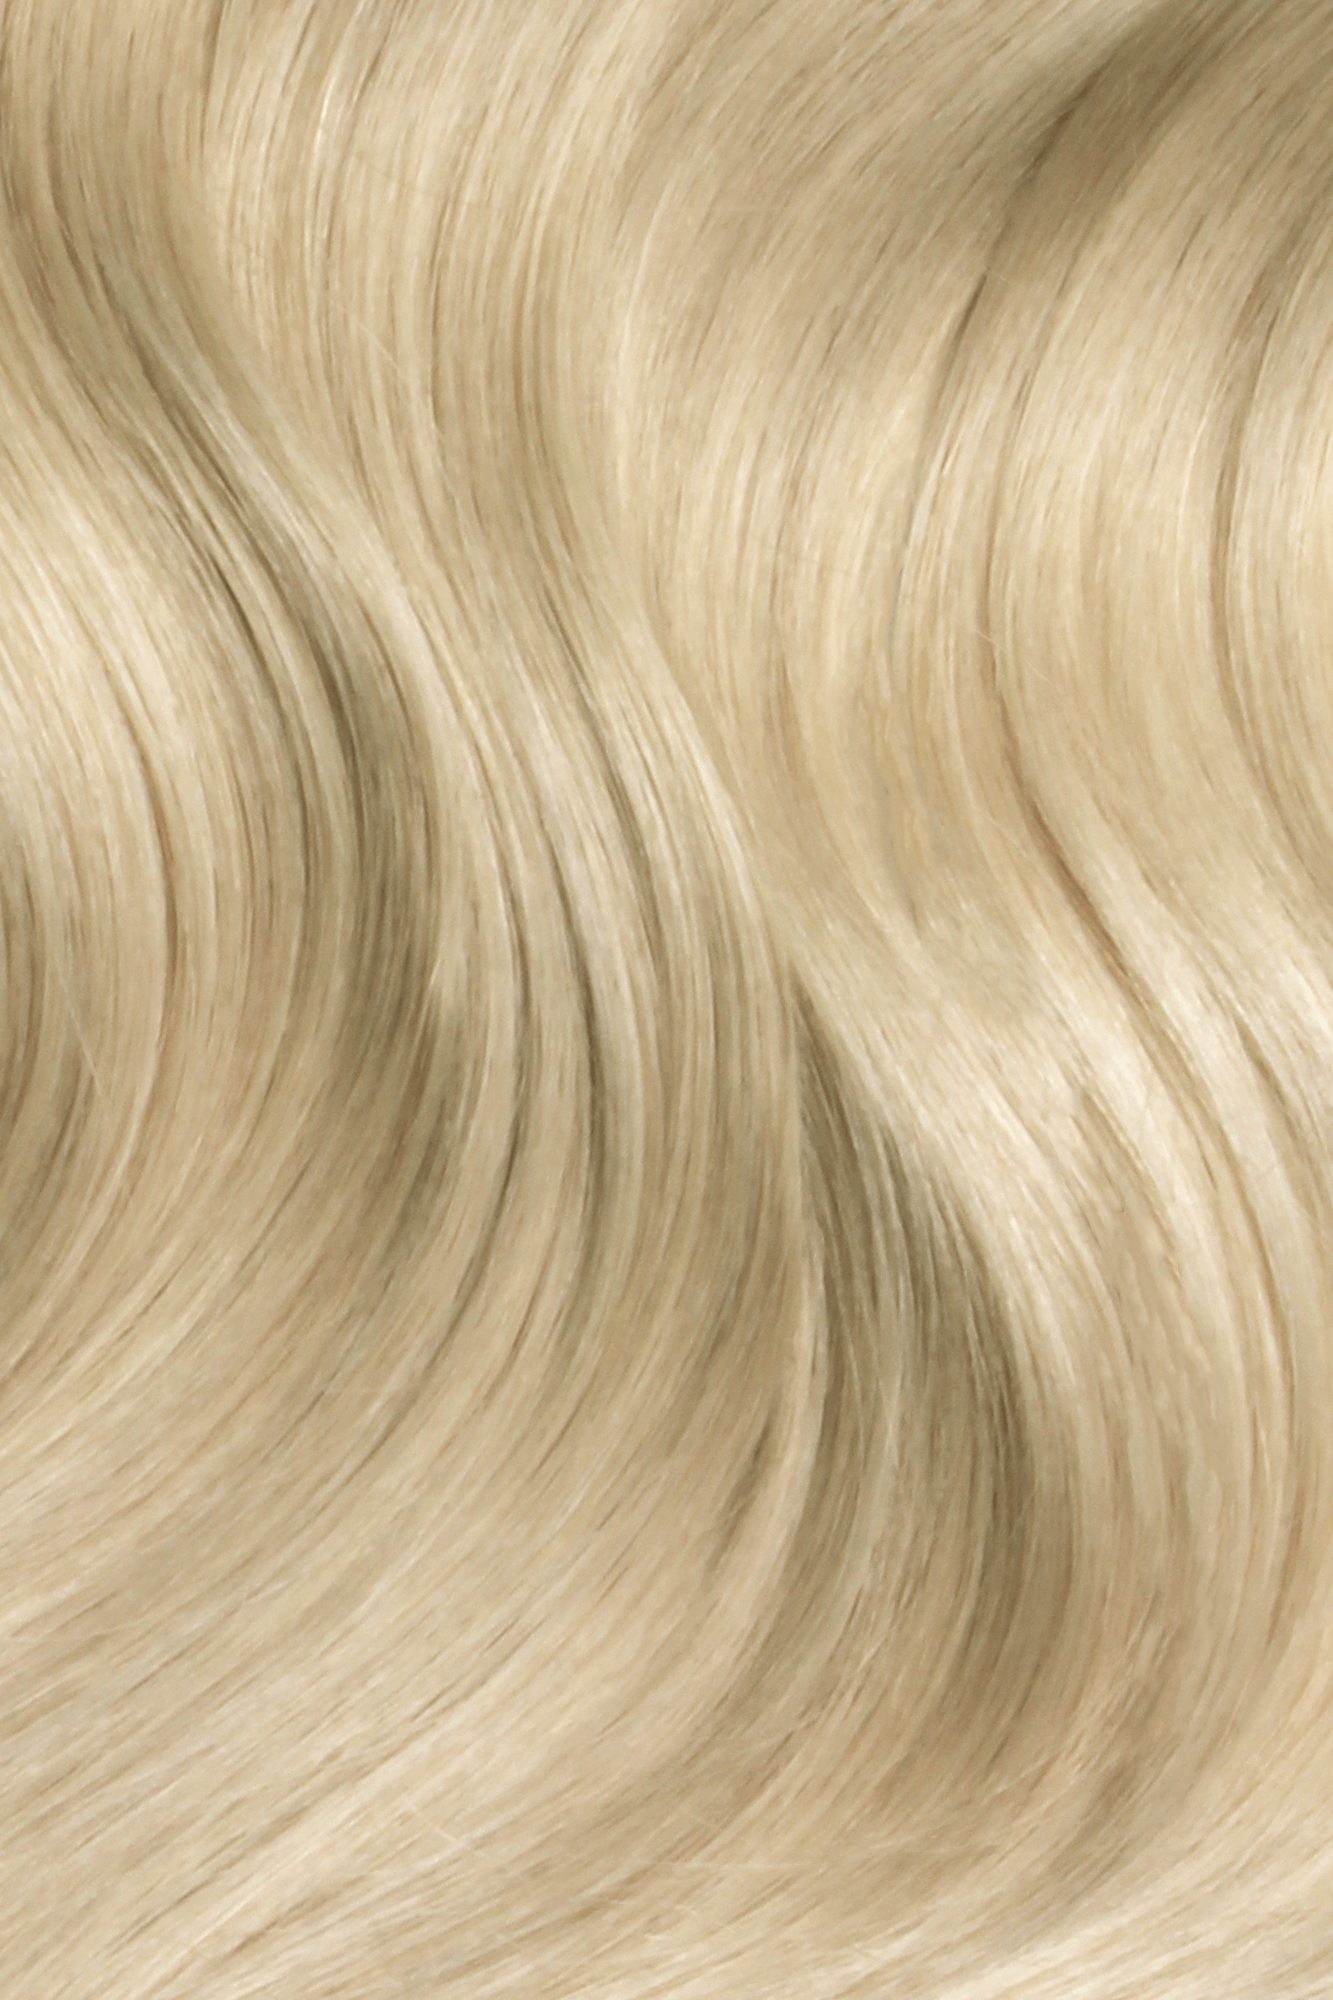 SEAMLESS® Tapes 18 Inches - SWAY Hair Extensions Hollywood-Ash-Blonde-18A-613A clip-in hair extensions made of 100% Double Drawn, Remy Human Hair. SWAY SEAMLESS® Tapes, 18 inches. Lightweight, flexible, and perfect for any hairstyle.